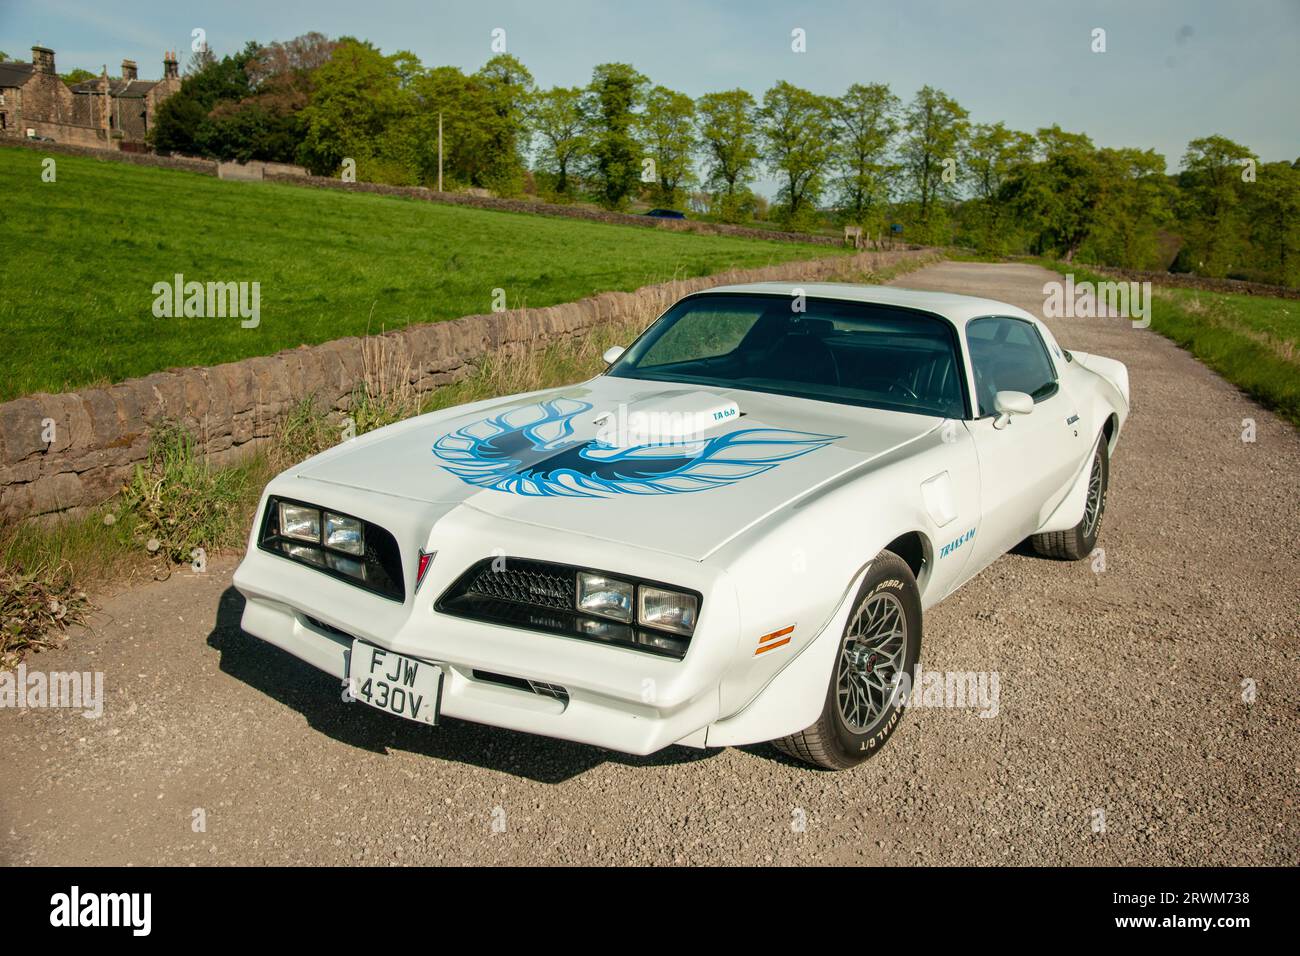 White Pontiac Firebird Trans-Am parked on a gravel lane on a sunny day, with a dry stone wall, farm fields and trees in the background Stock Photo